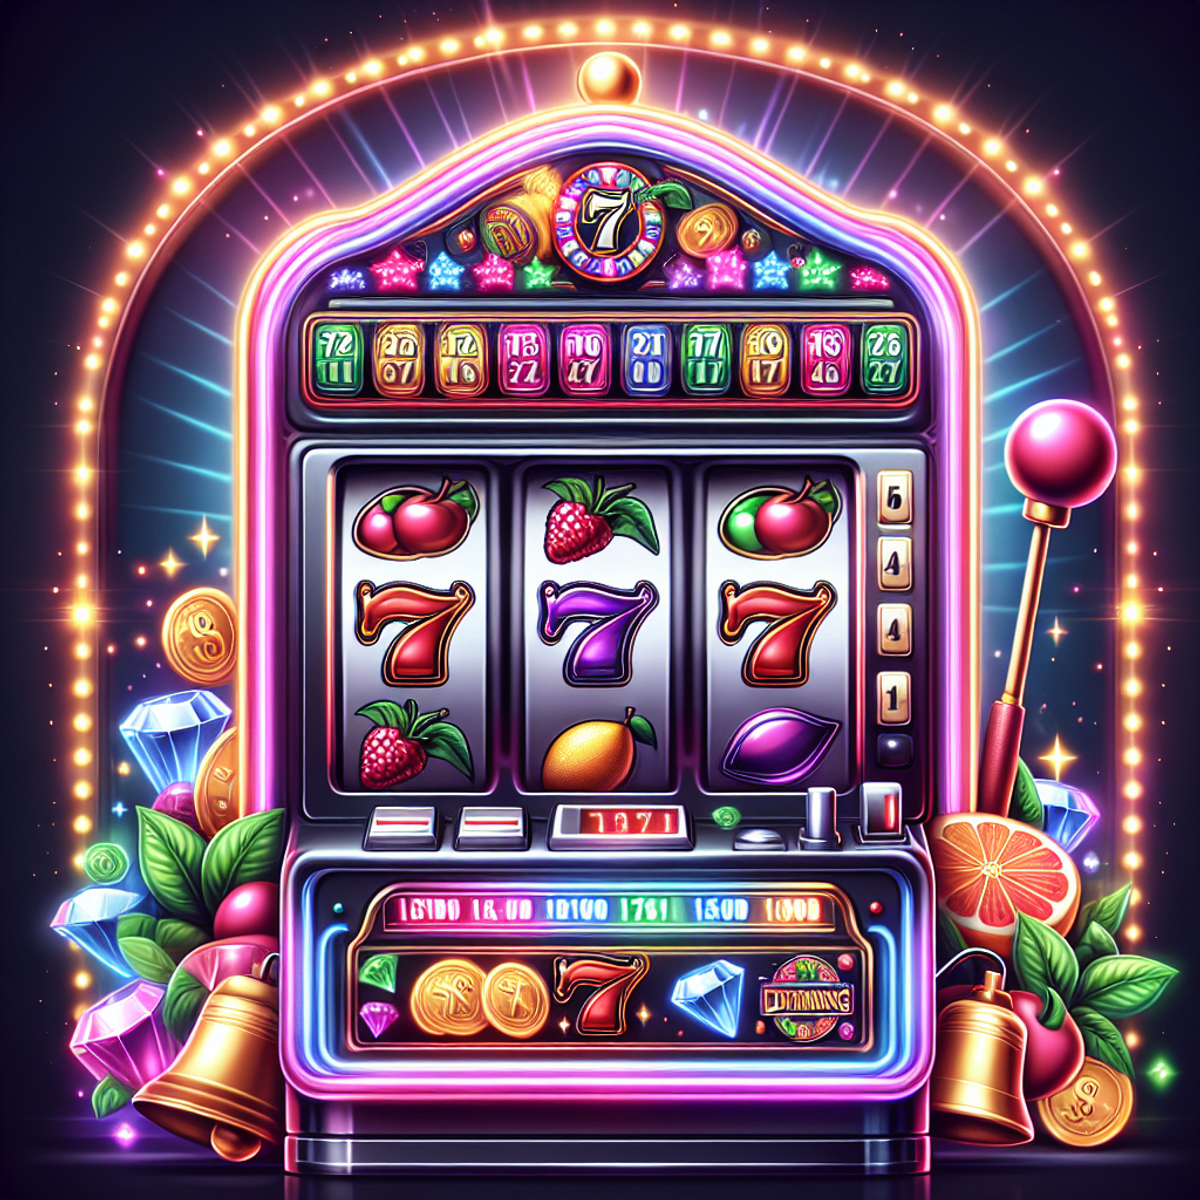 A colorful and vibrant casino slot machine with fruits, bells, lucky 7’s, and diamonds as symbols, illuminated by flashing neon lights.